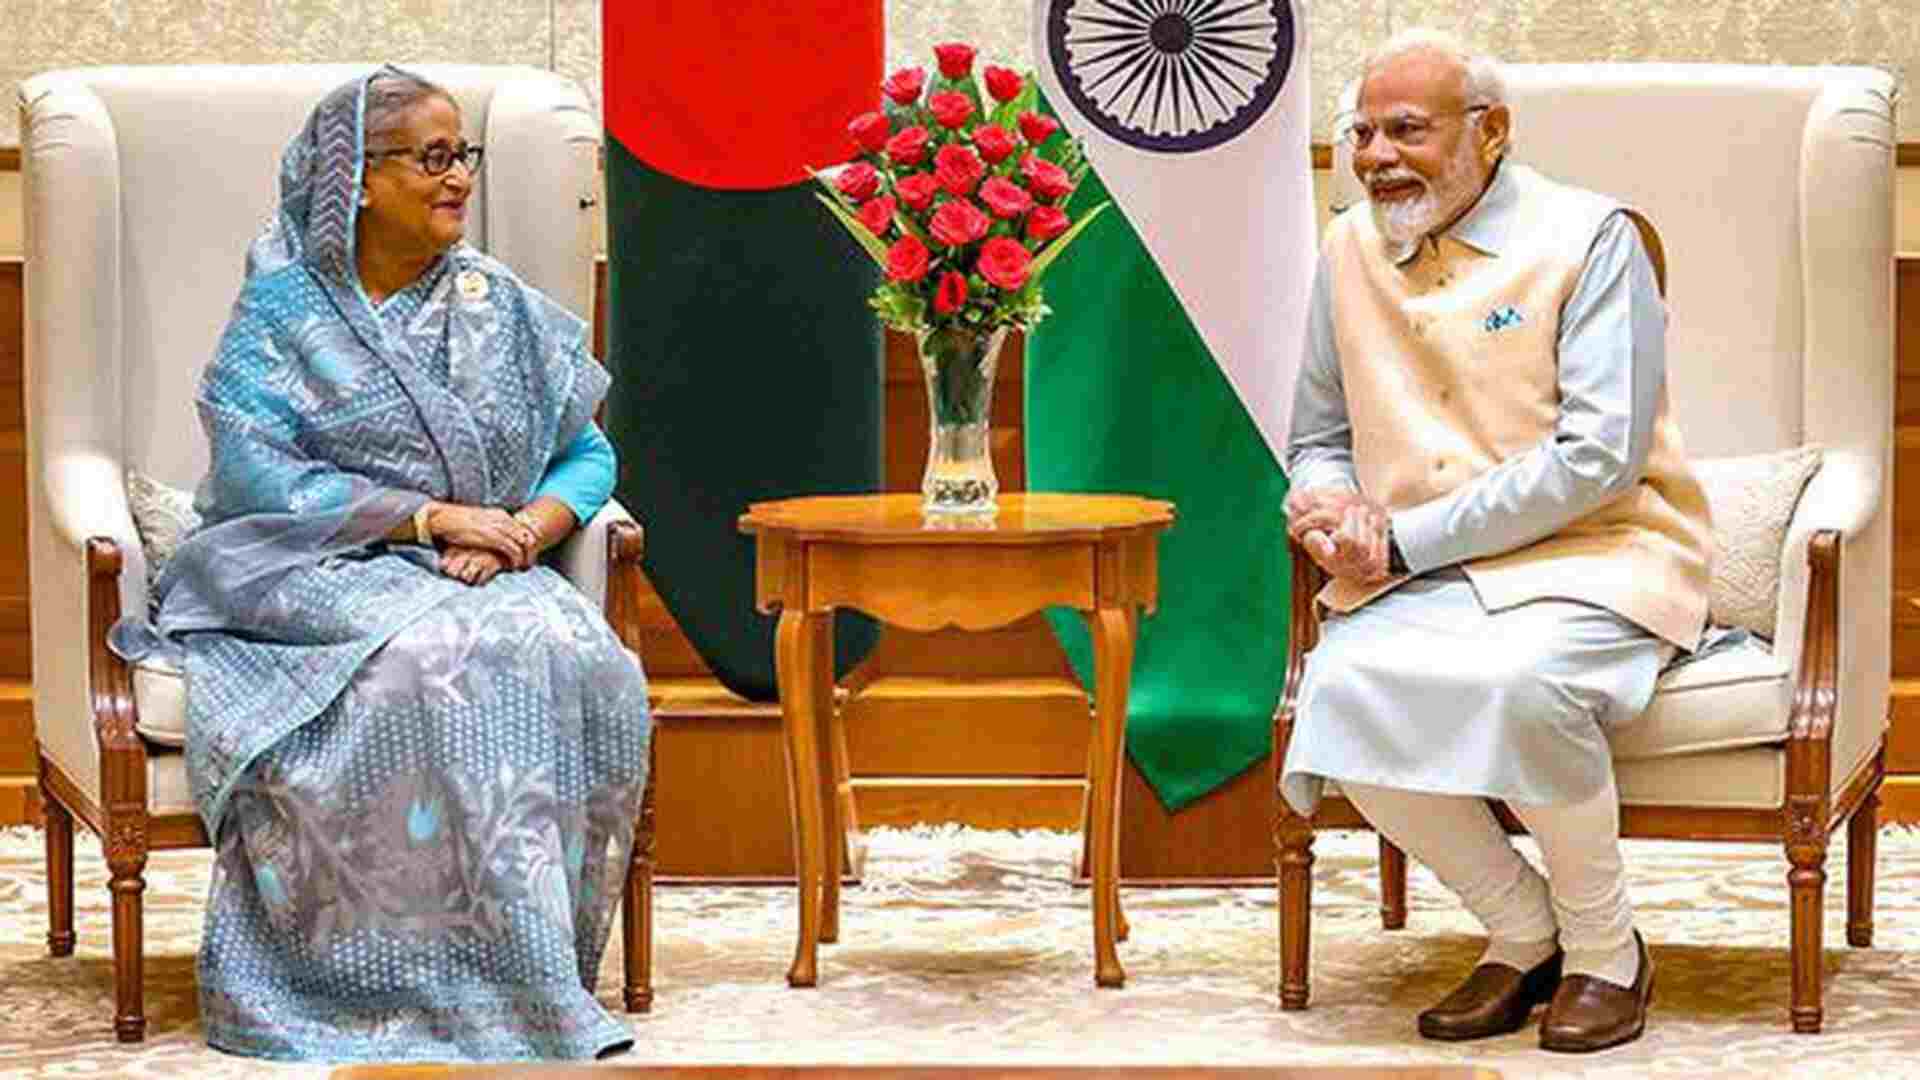 Sheikh Hasina’s Second India Trip In 15 Days, Ahead of PM’s Dhaka Trip